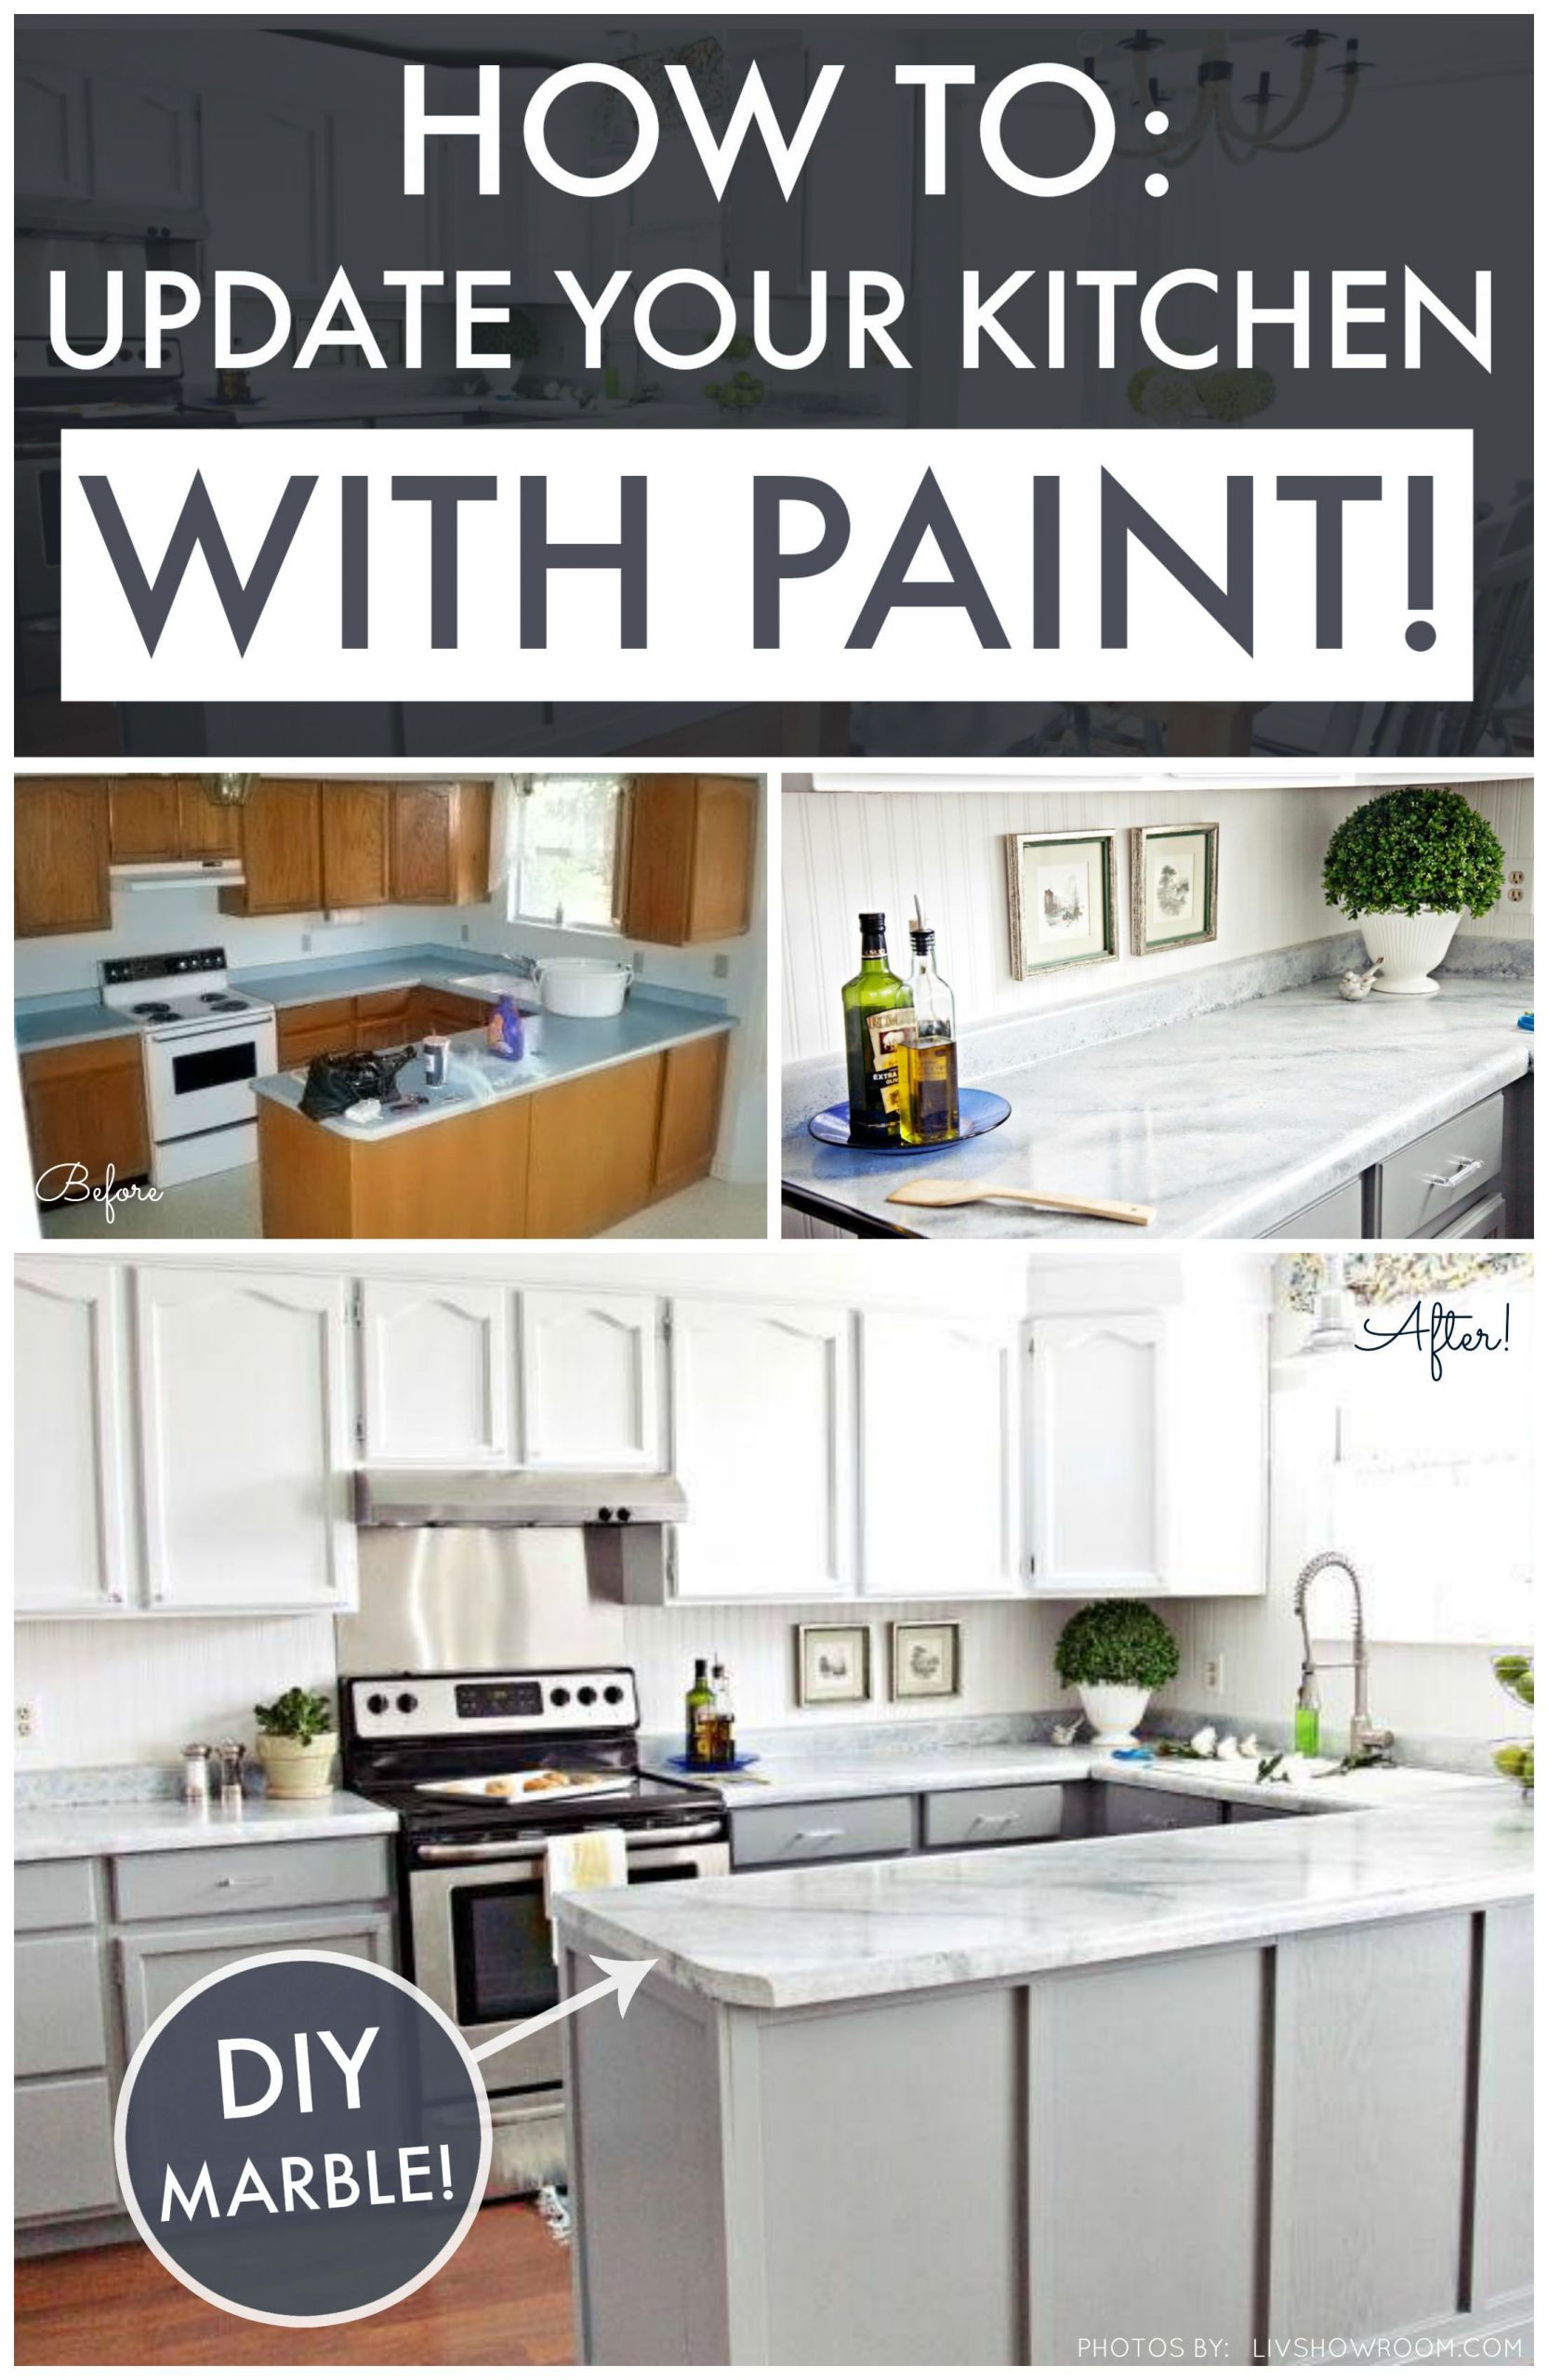 Kitchen Countertop Painting Kits
 DIY Kitchen Makeover on a Bud Giani Granite Countertop